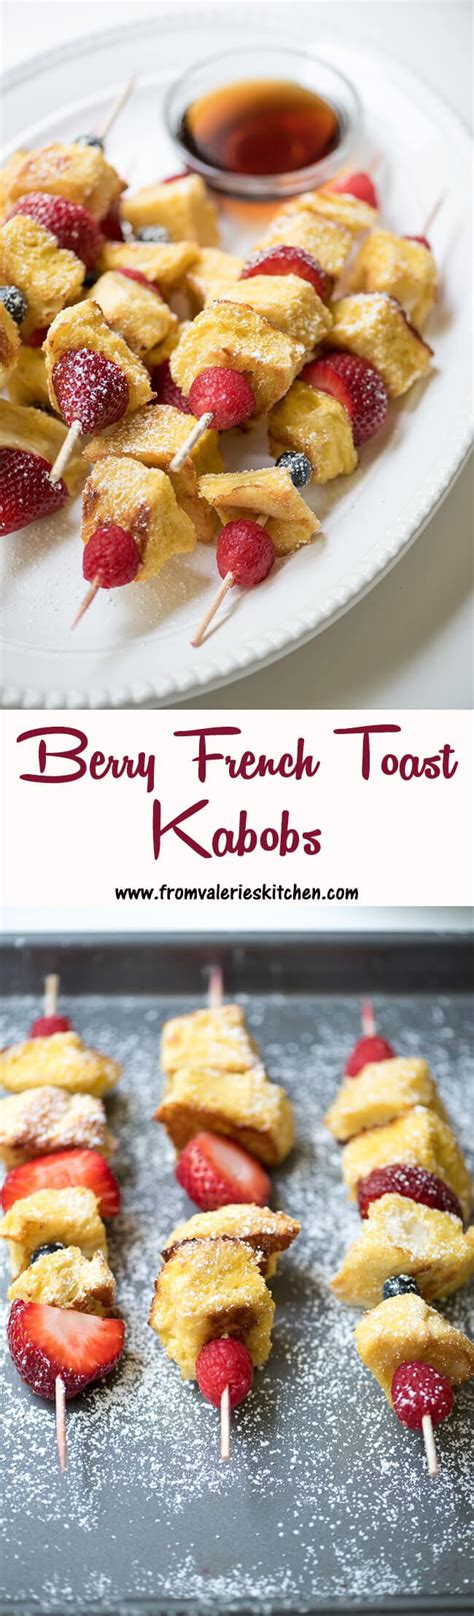 Berry French Toast Kabobs From Valeries Kitchen Brunch Finger